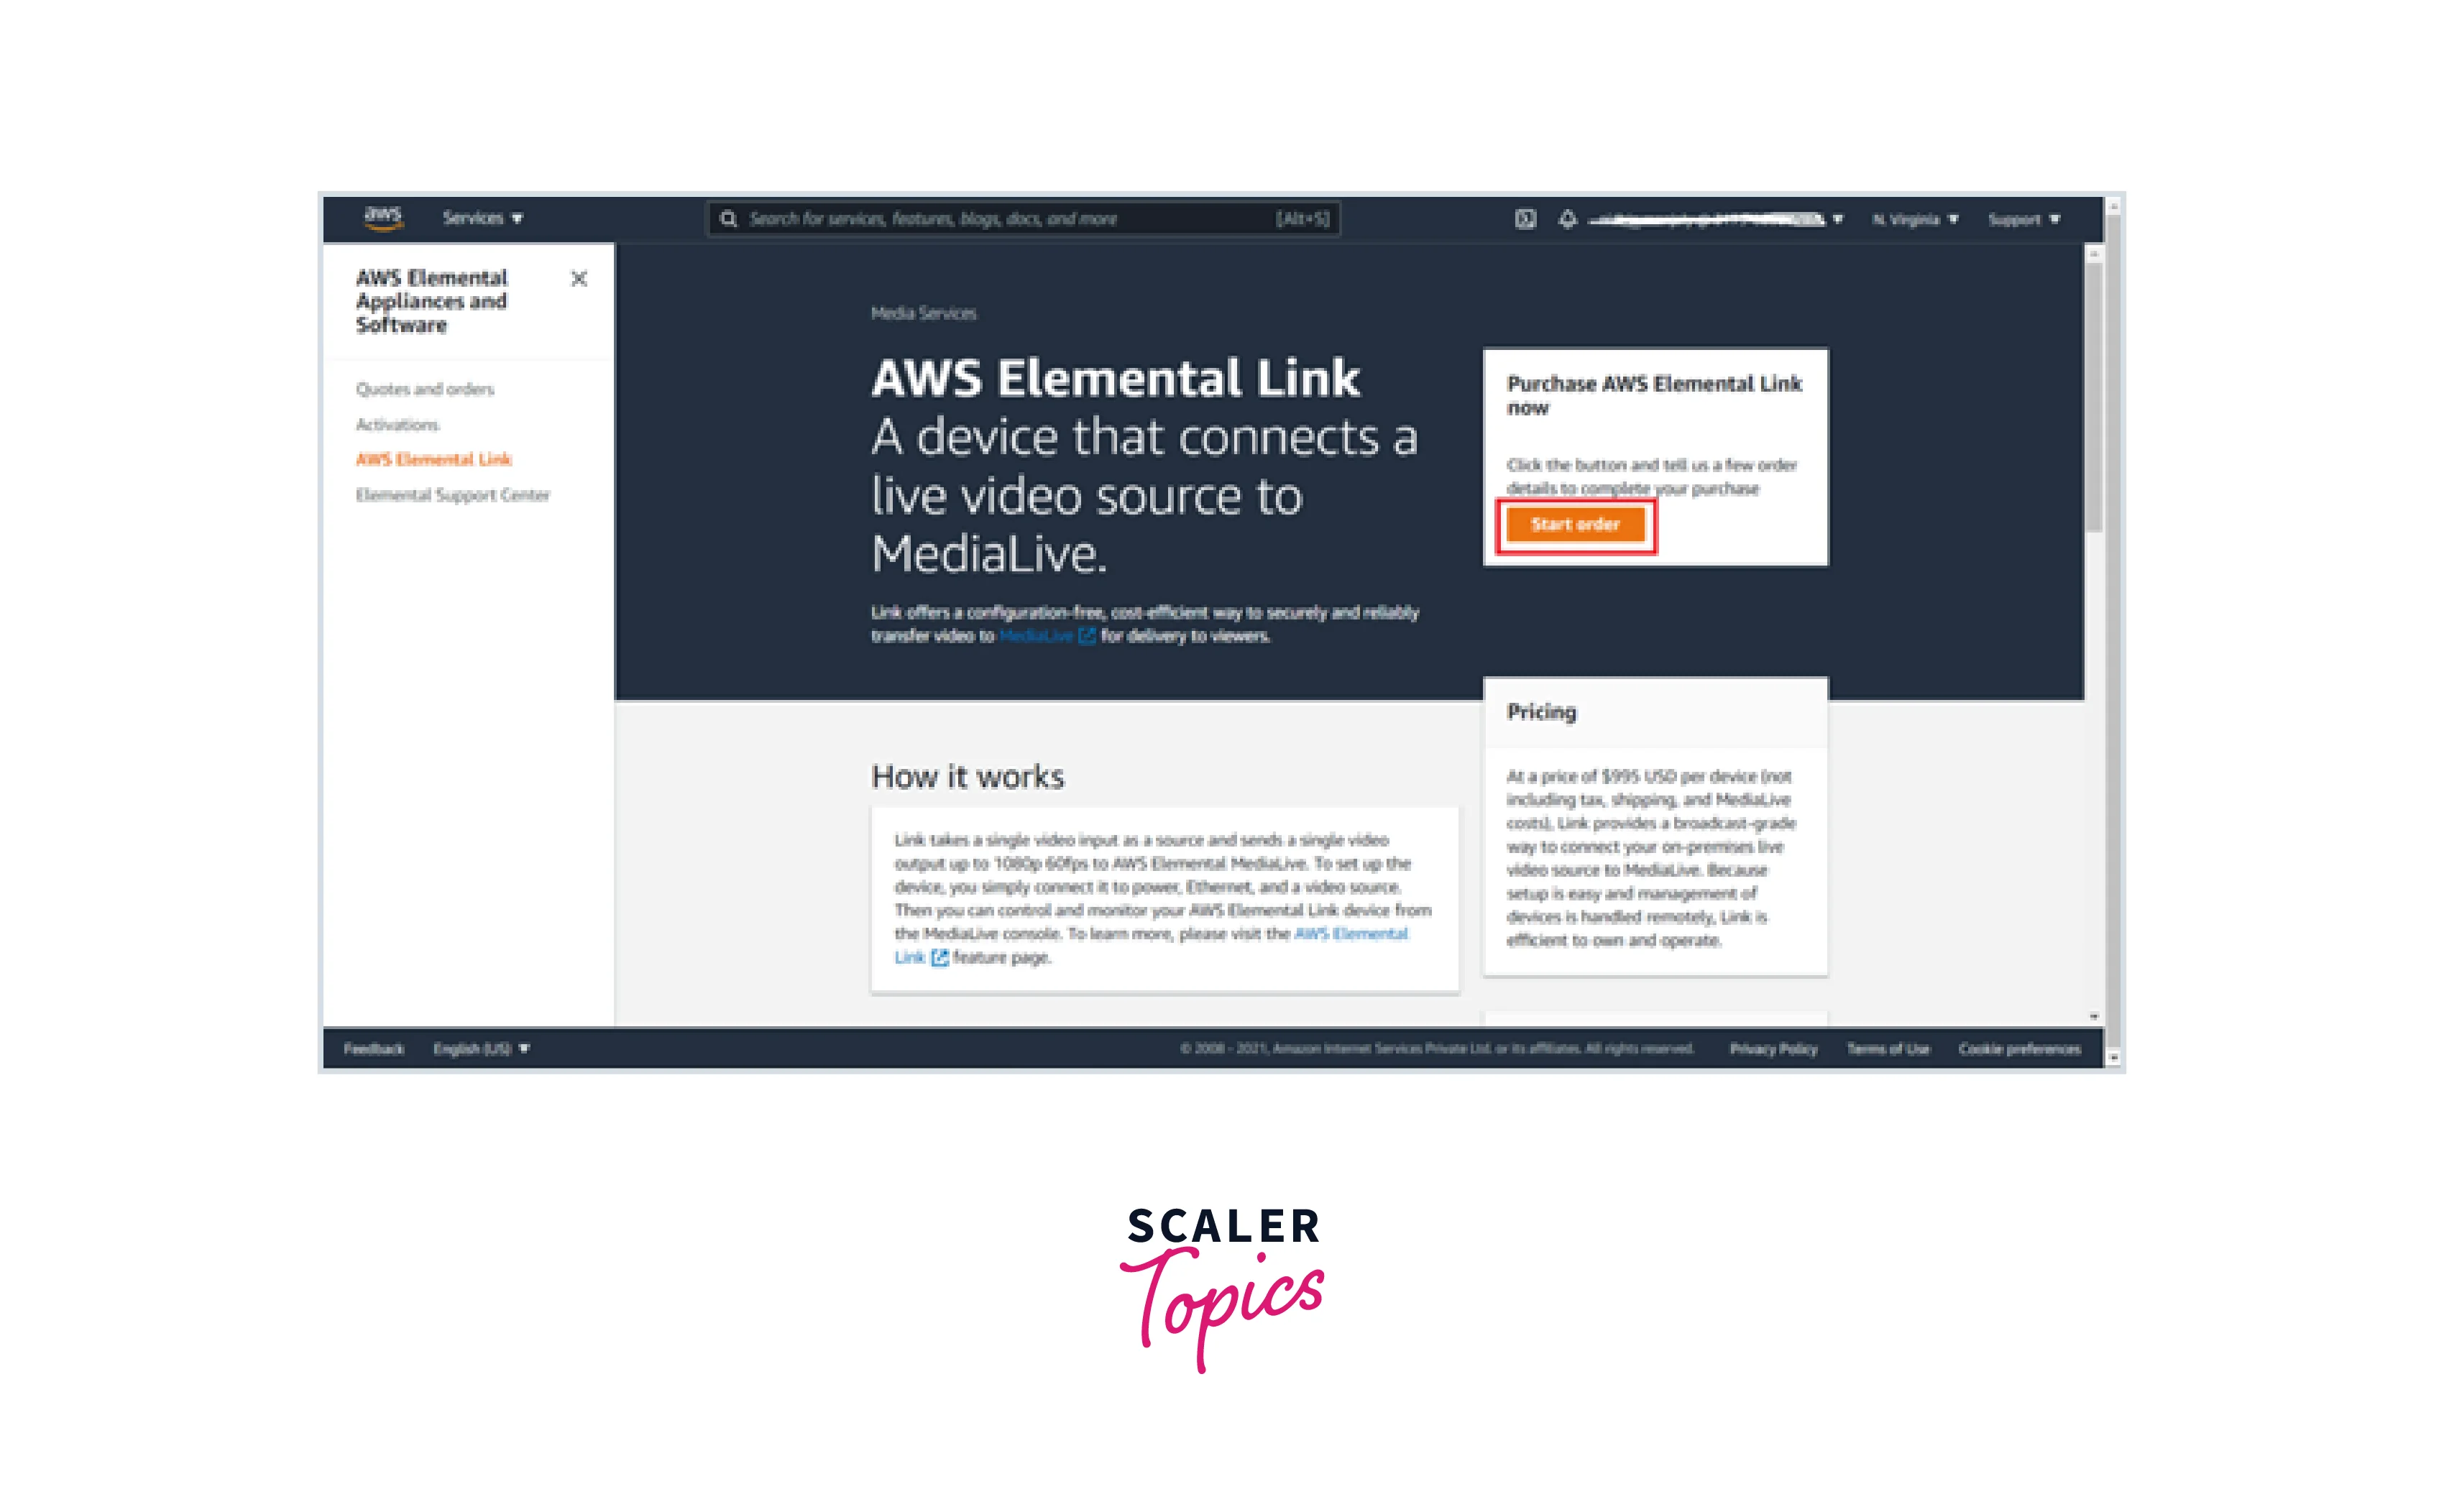 Getting a device from AWS Elemental Link 3